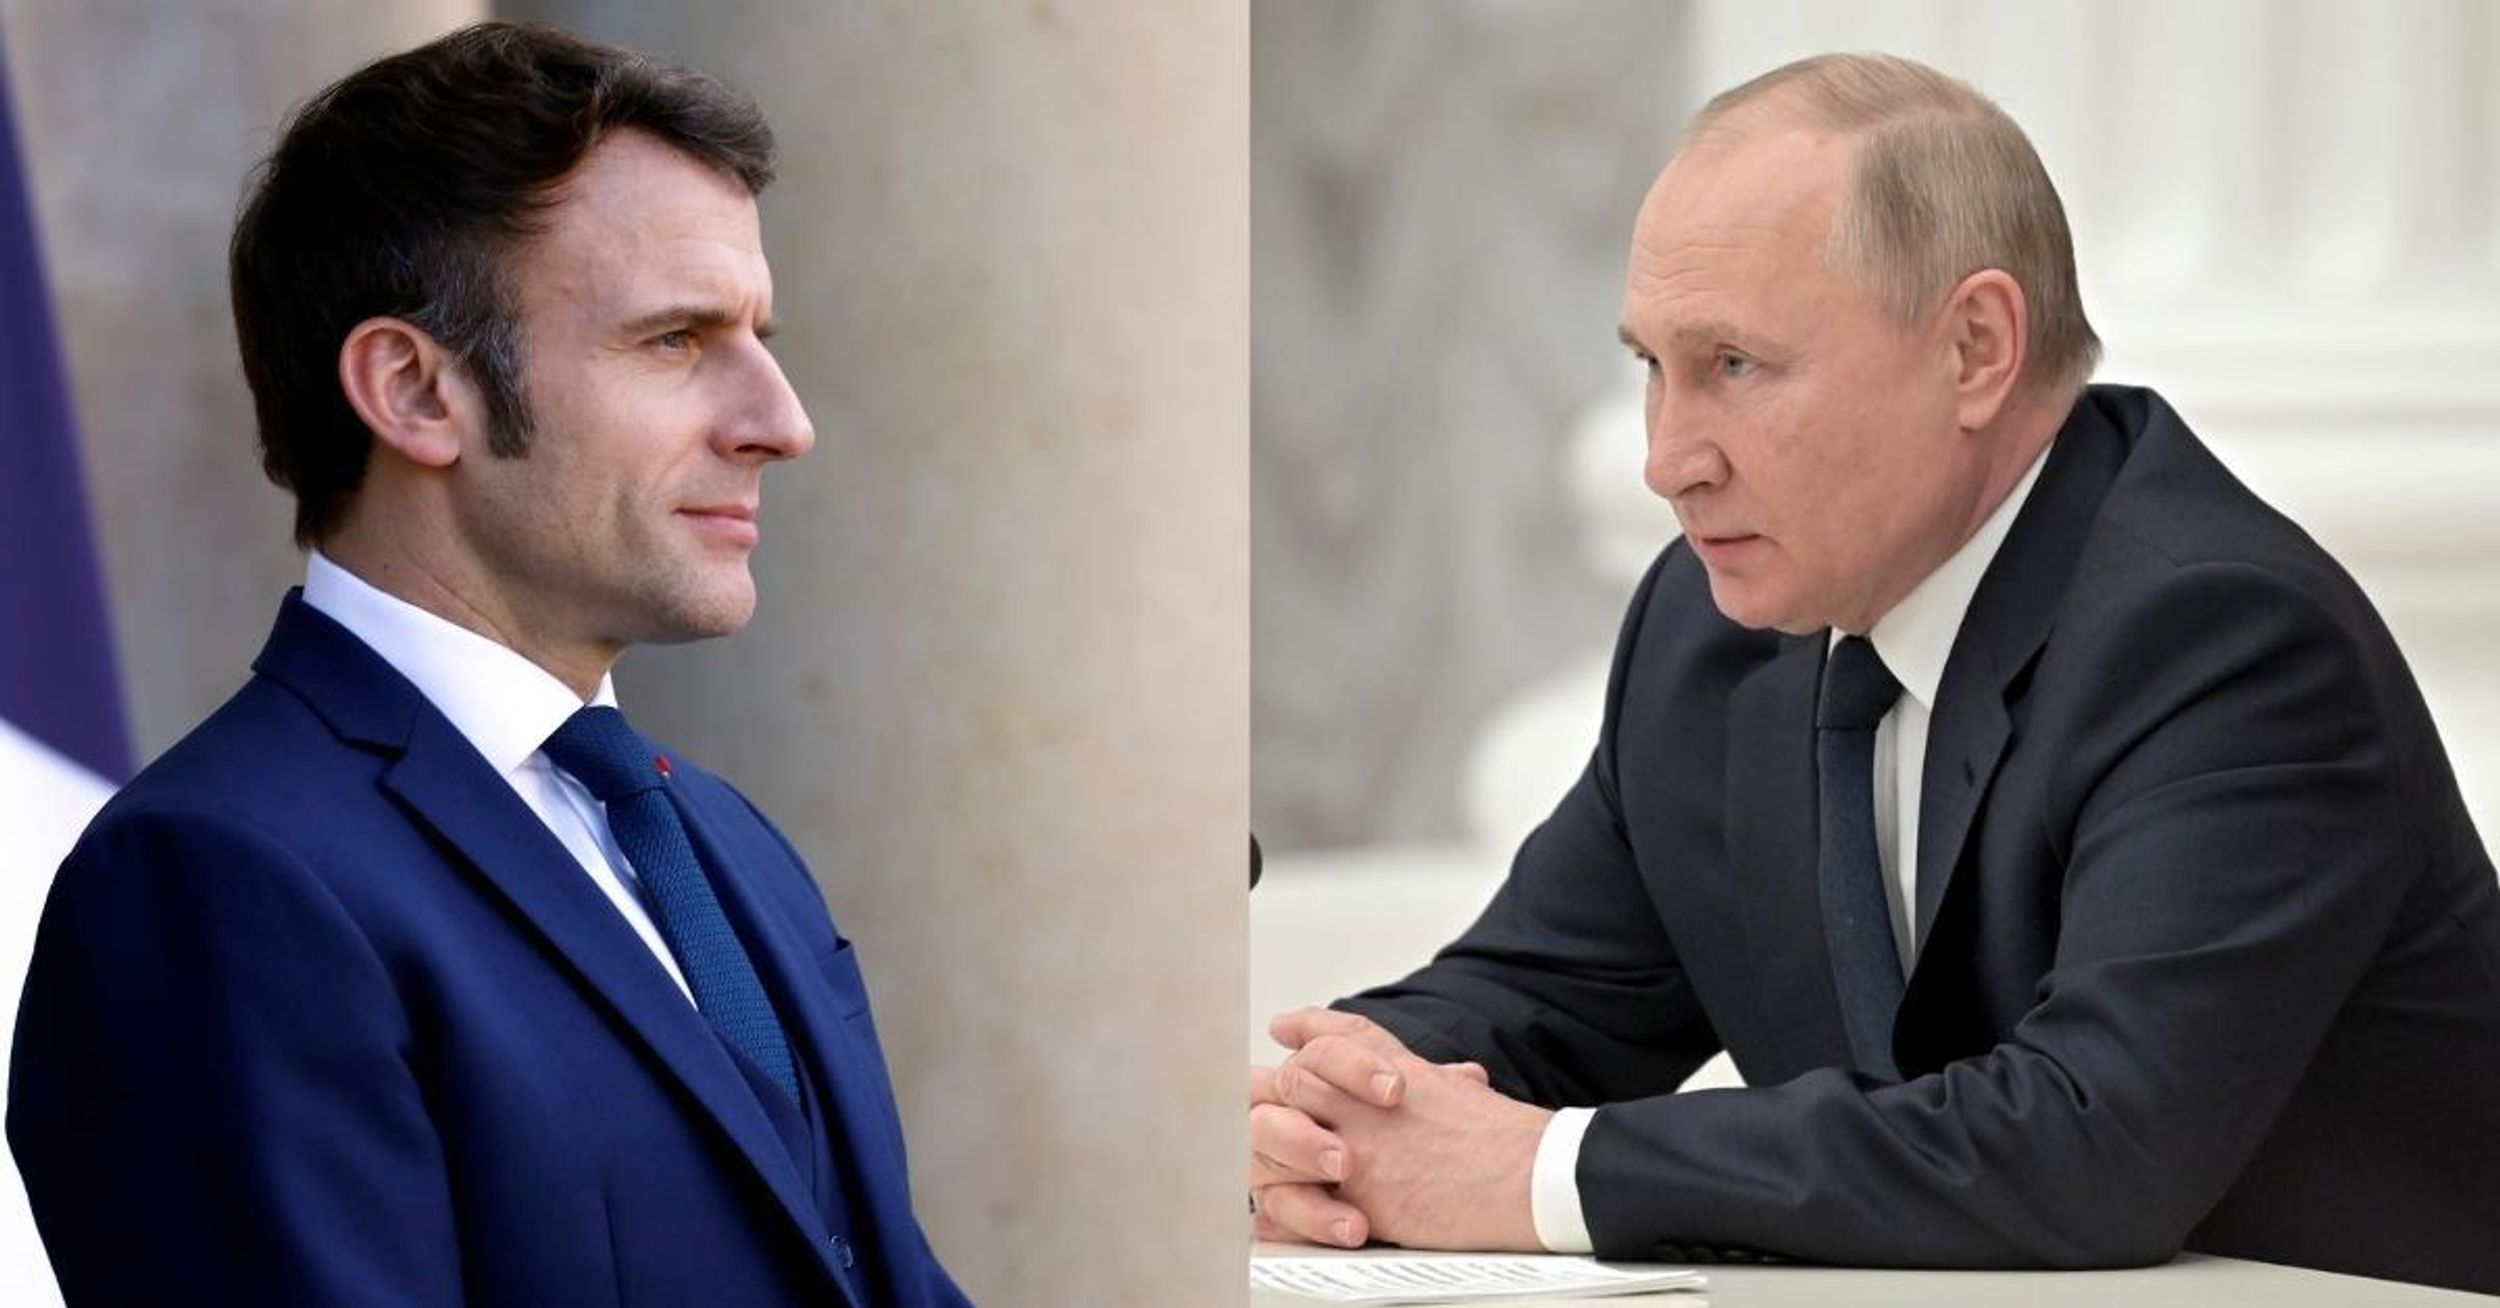 Emmanuel Macron's Dramatic Photos After Phone Call With Putin Become An Instant Viral Meme